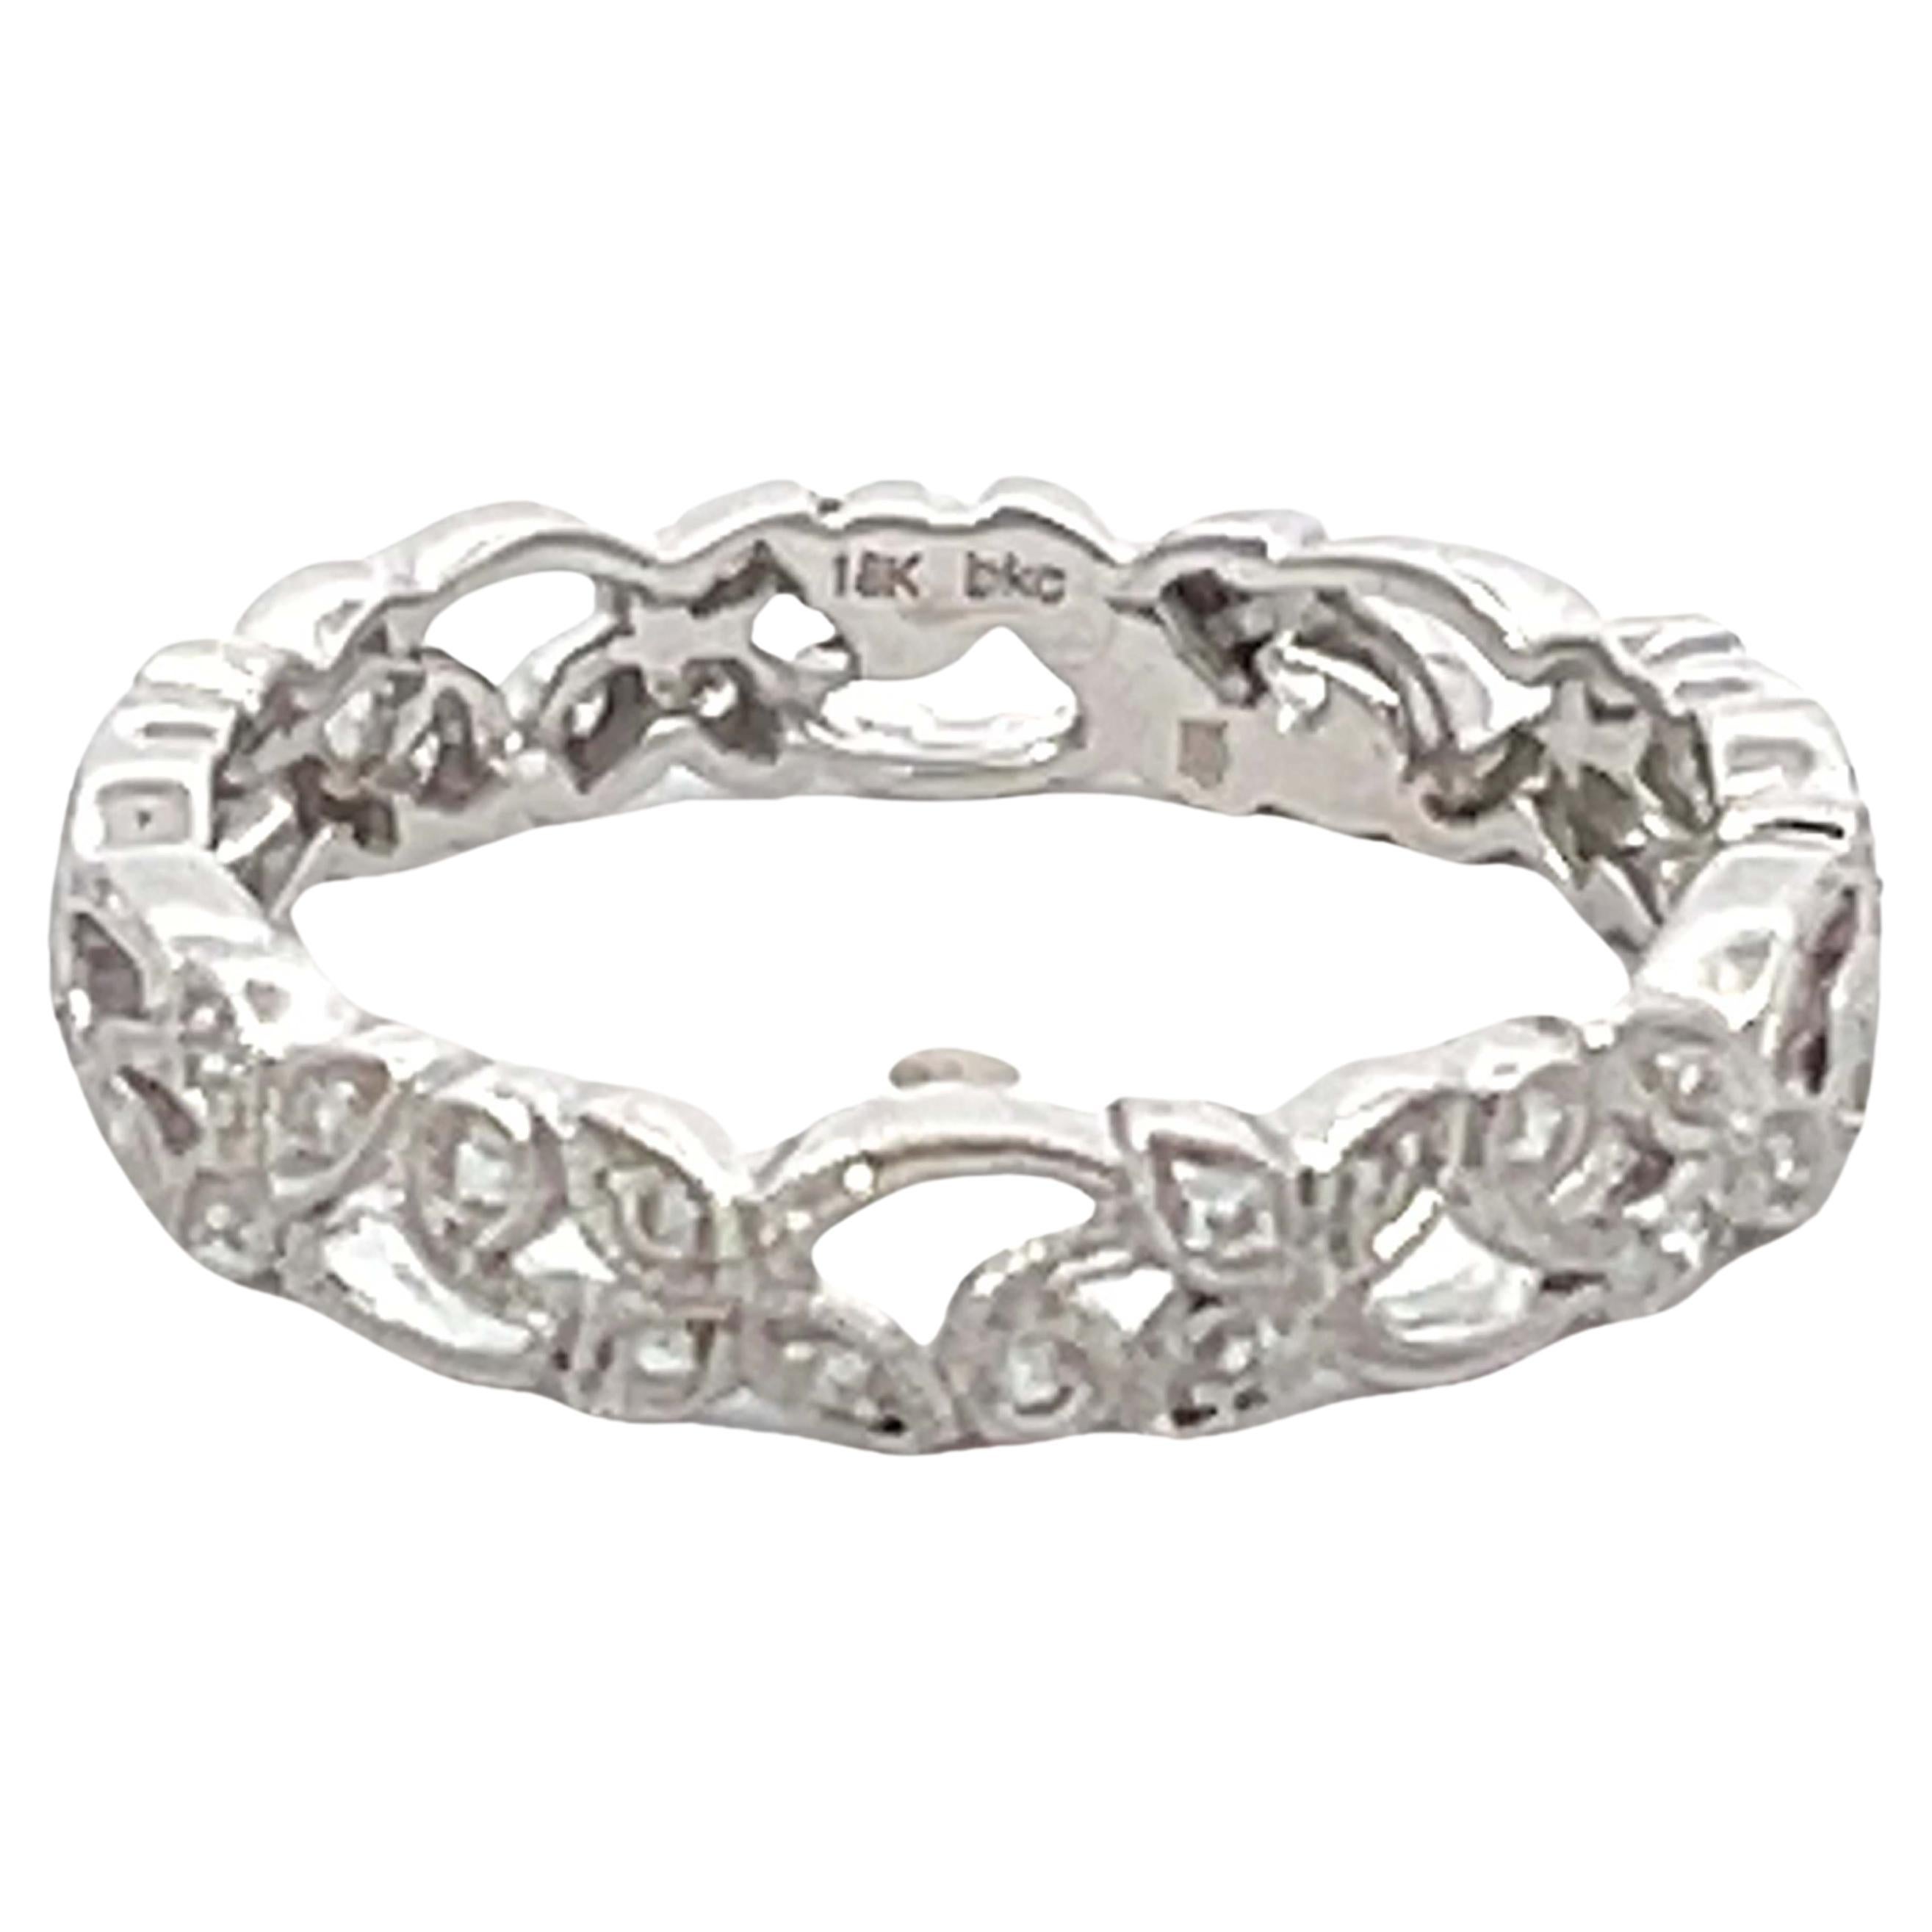 Beverley Kay Floral Eternity Band Ring 18k White Gold